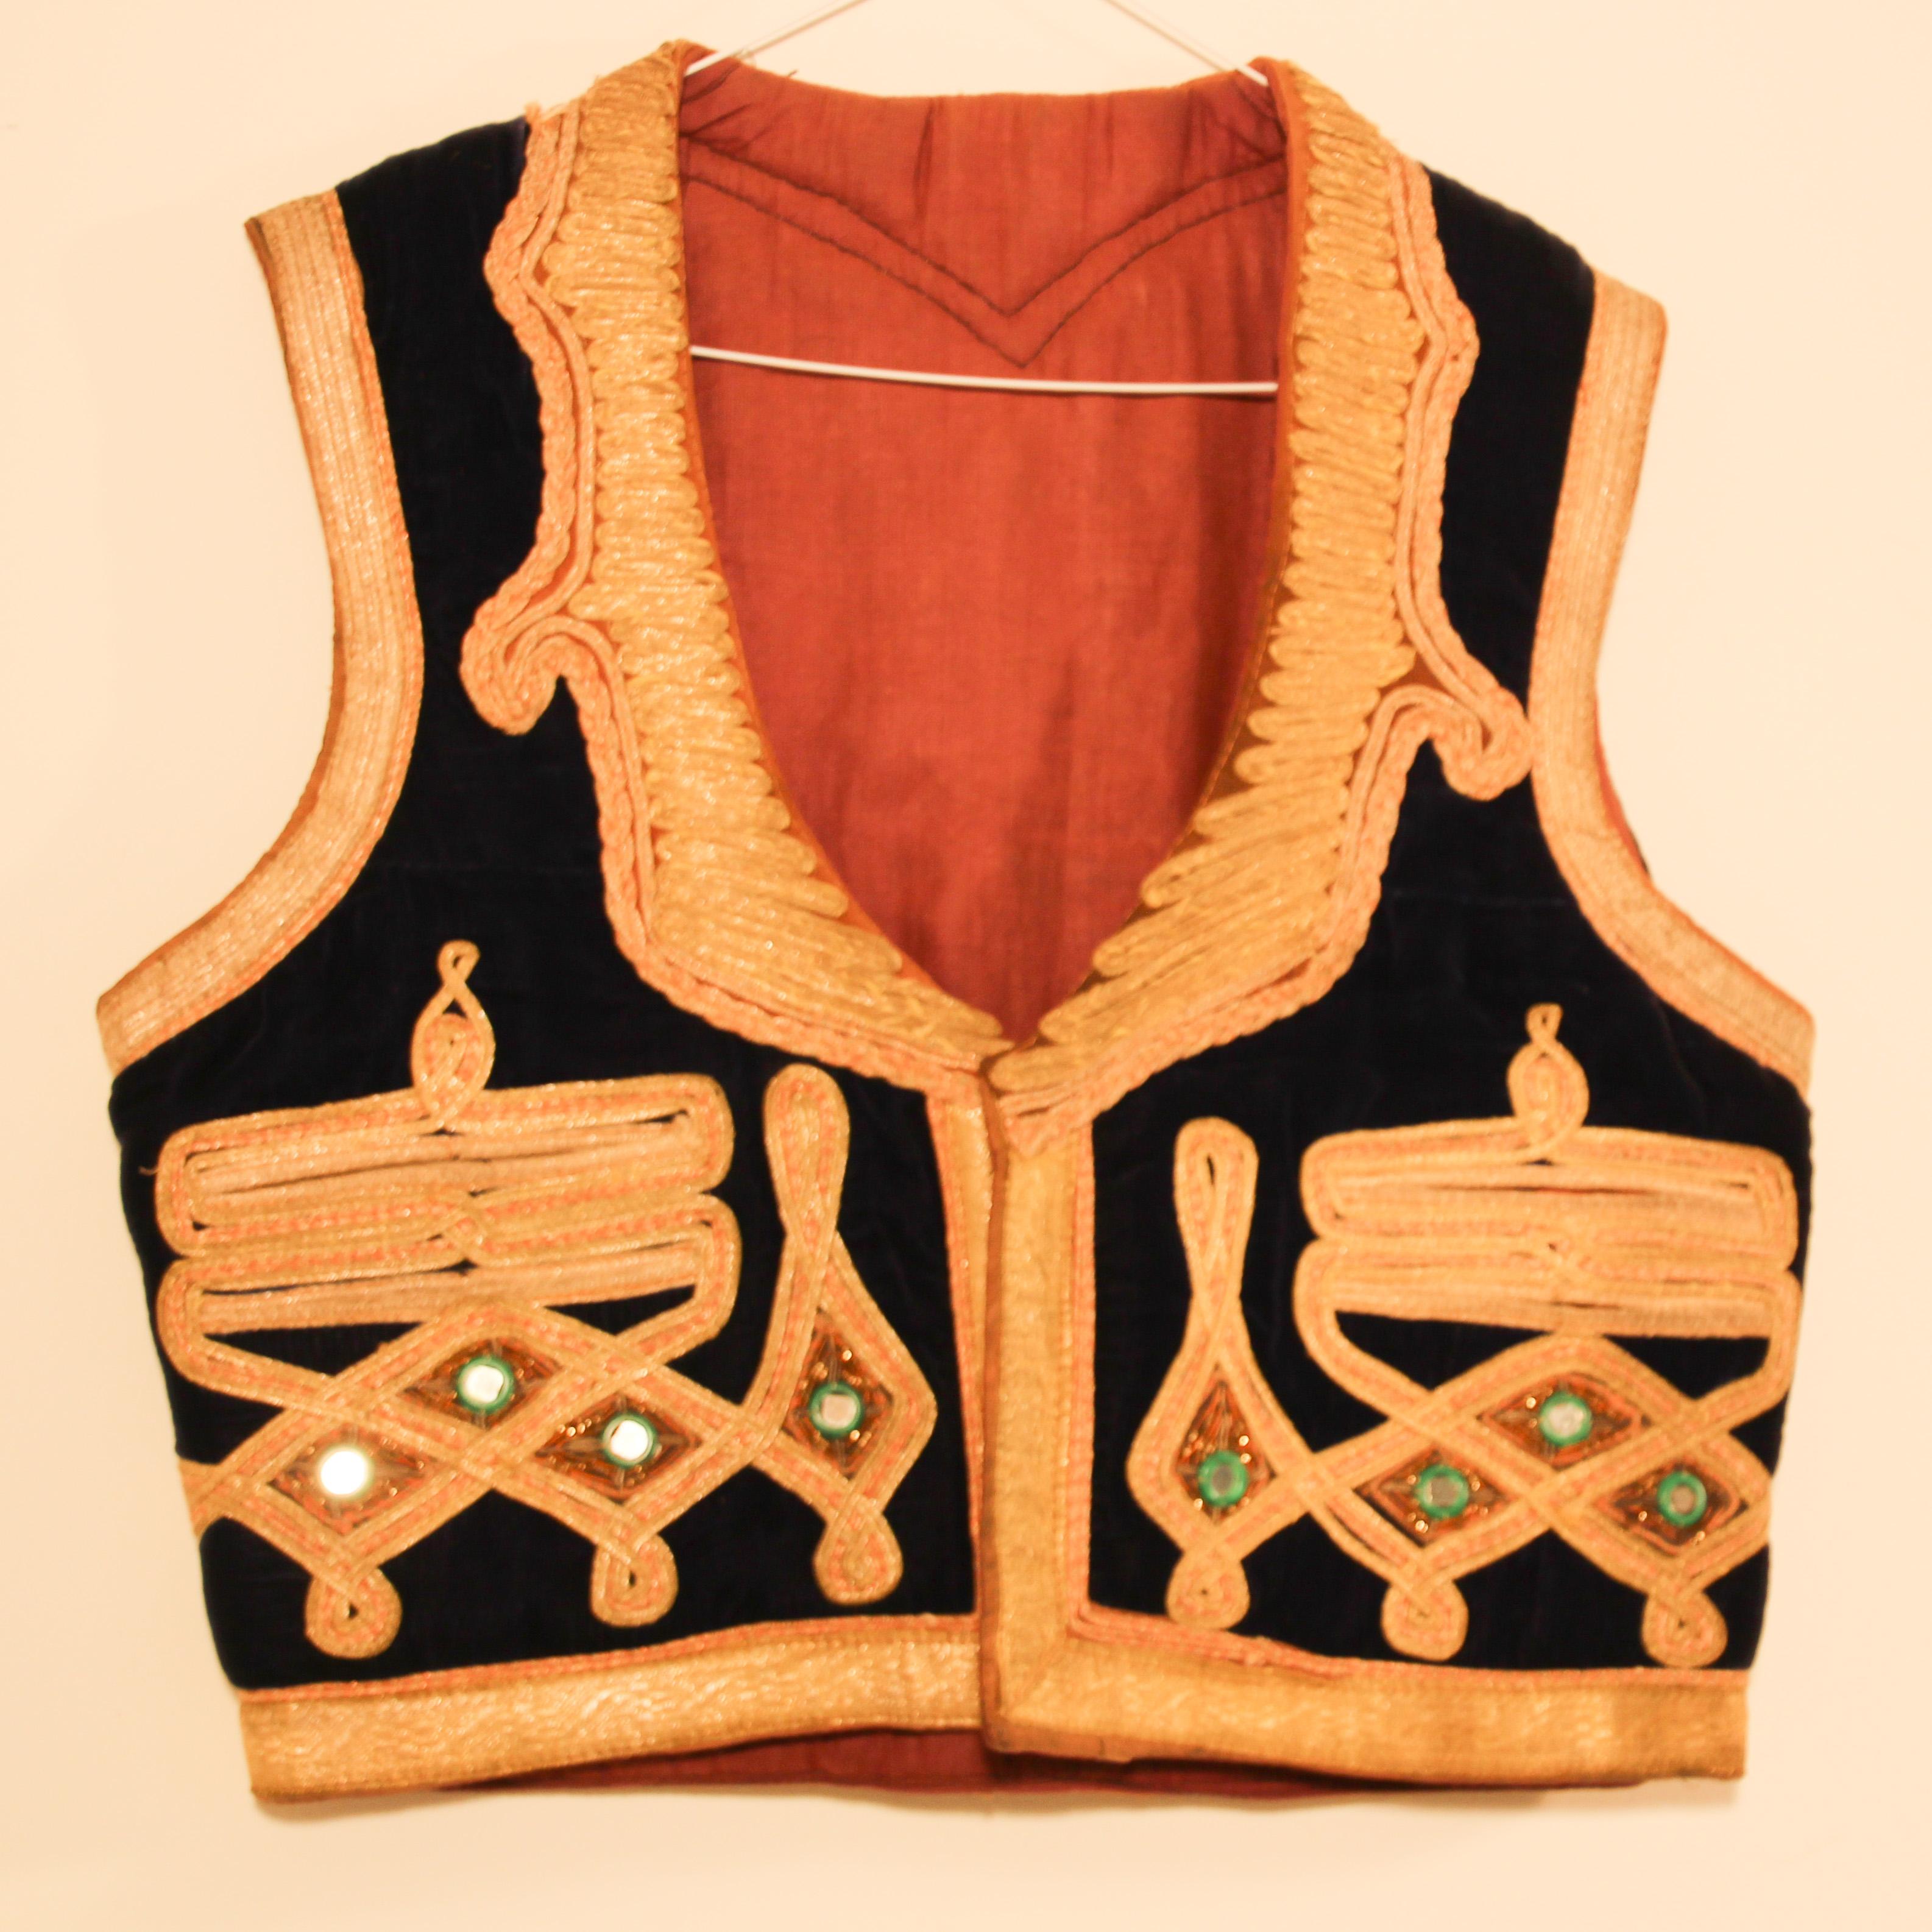 Authentic late 19th century antique ottoman Turkish vest in royal blue silk velvet decorated with elaborate gold thread, trimmed with gold metallic thread.
Elegant vest handmade embroidery with small mirrors inset on blue silk velvet, fully